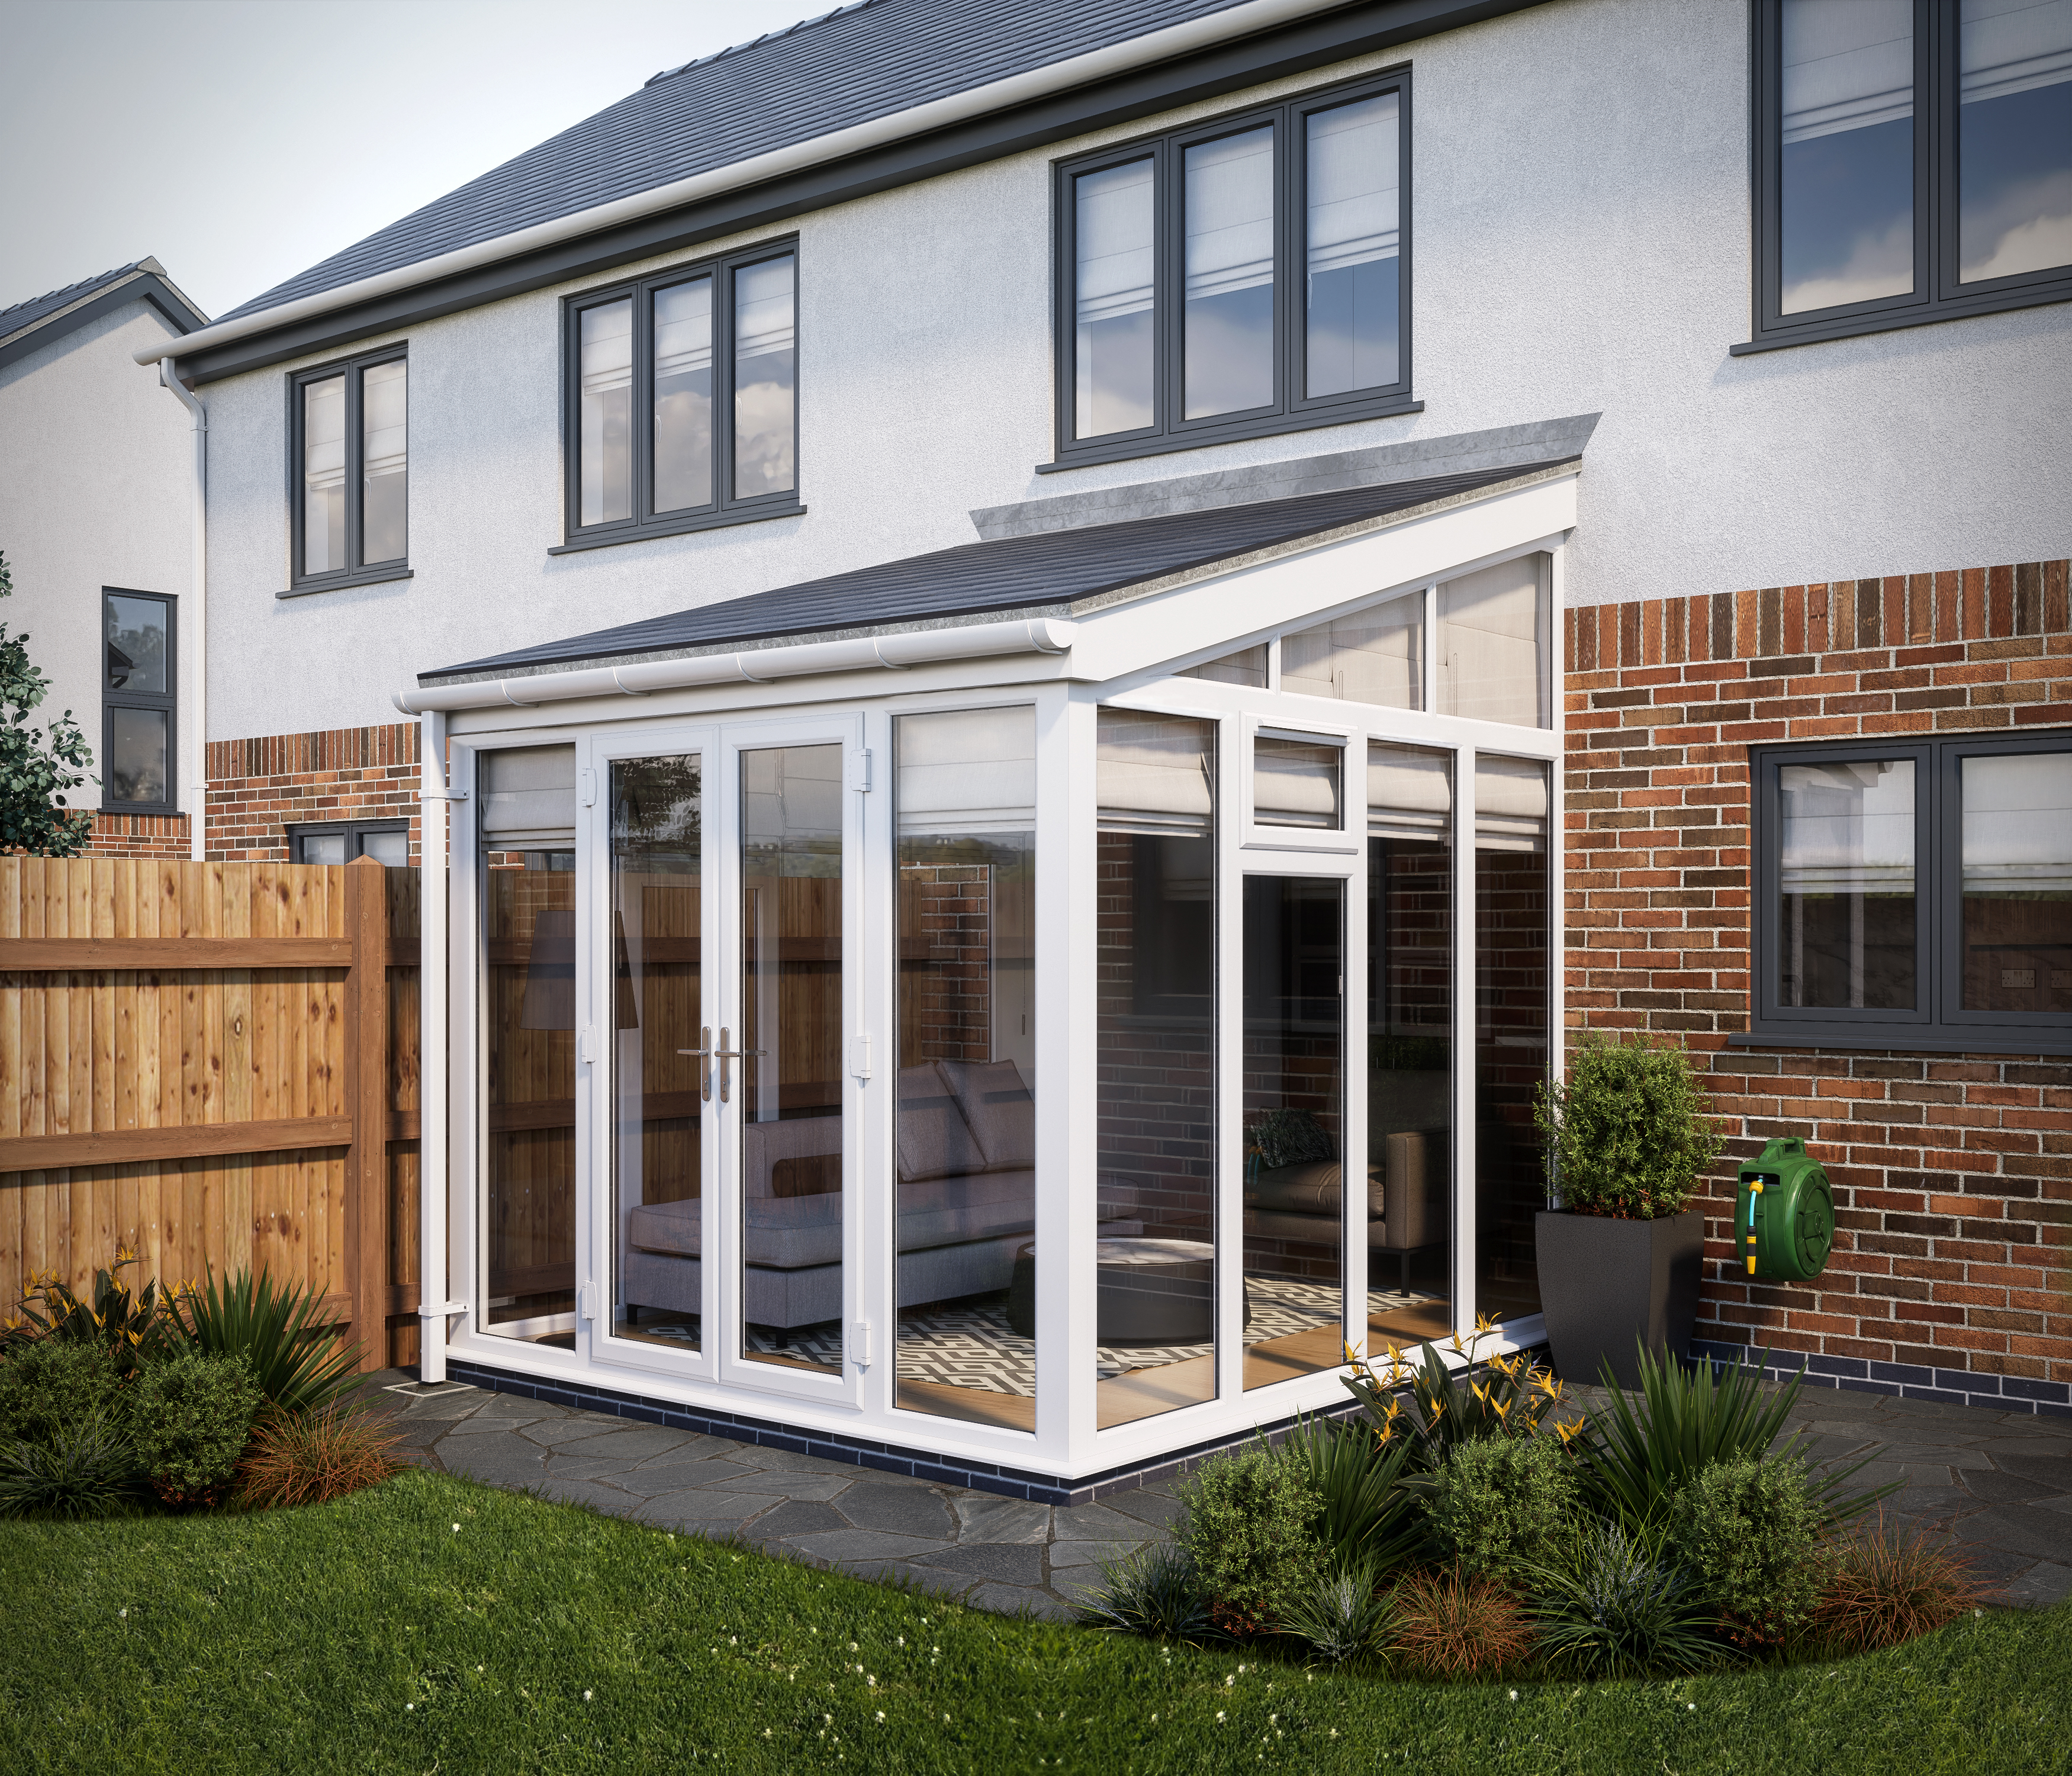 Image of SOLid Roof Full Height Lean to Conservatory White Frames with Titanium Grey Tiles - 10 x 10ft